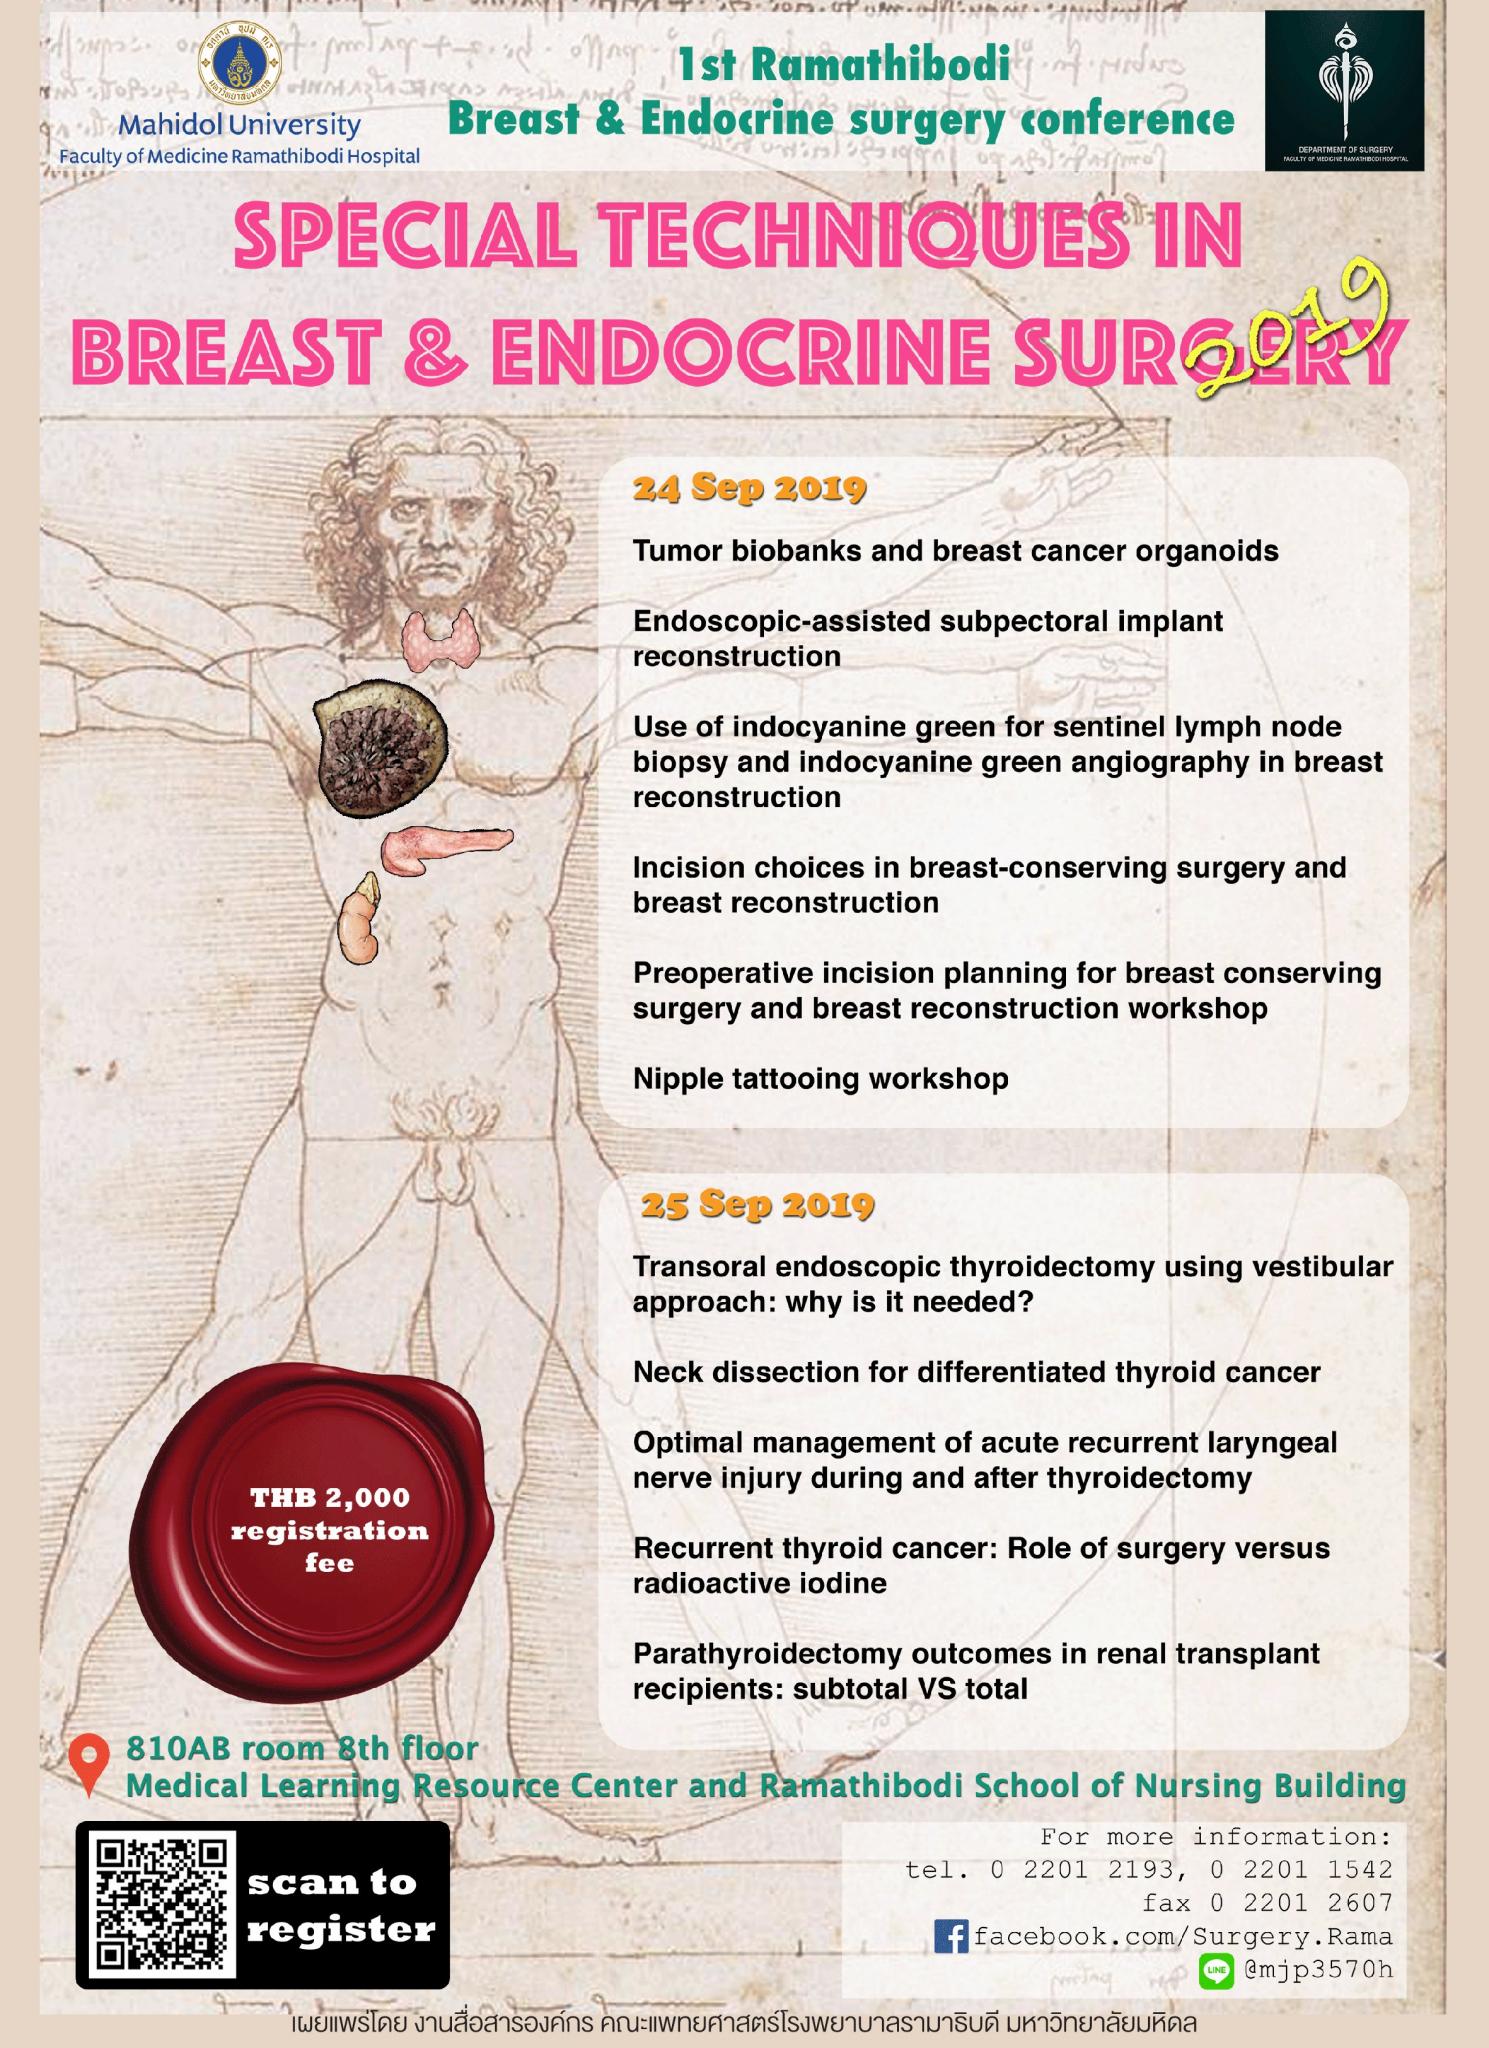 SPECIAL TECHNIQUES IN BREAST & ENDOCRINE SURGERY 2019